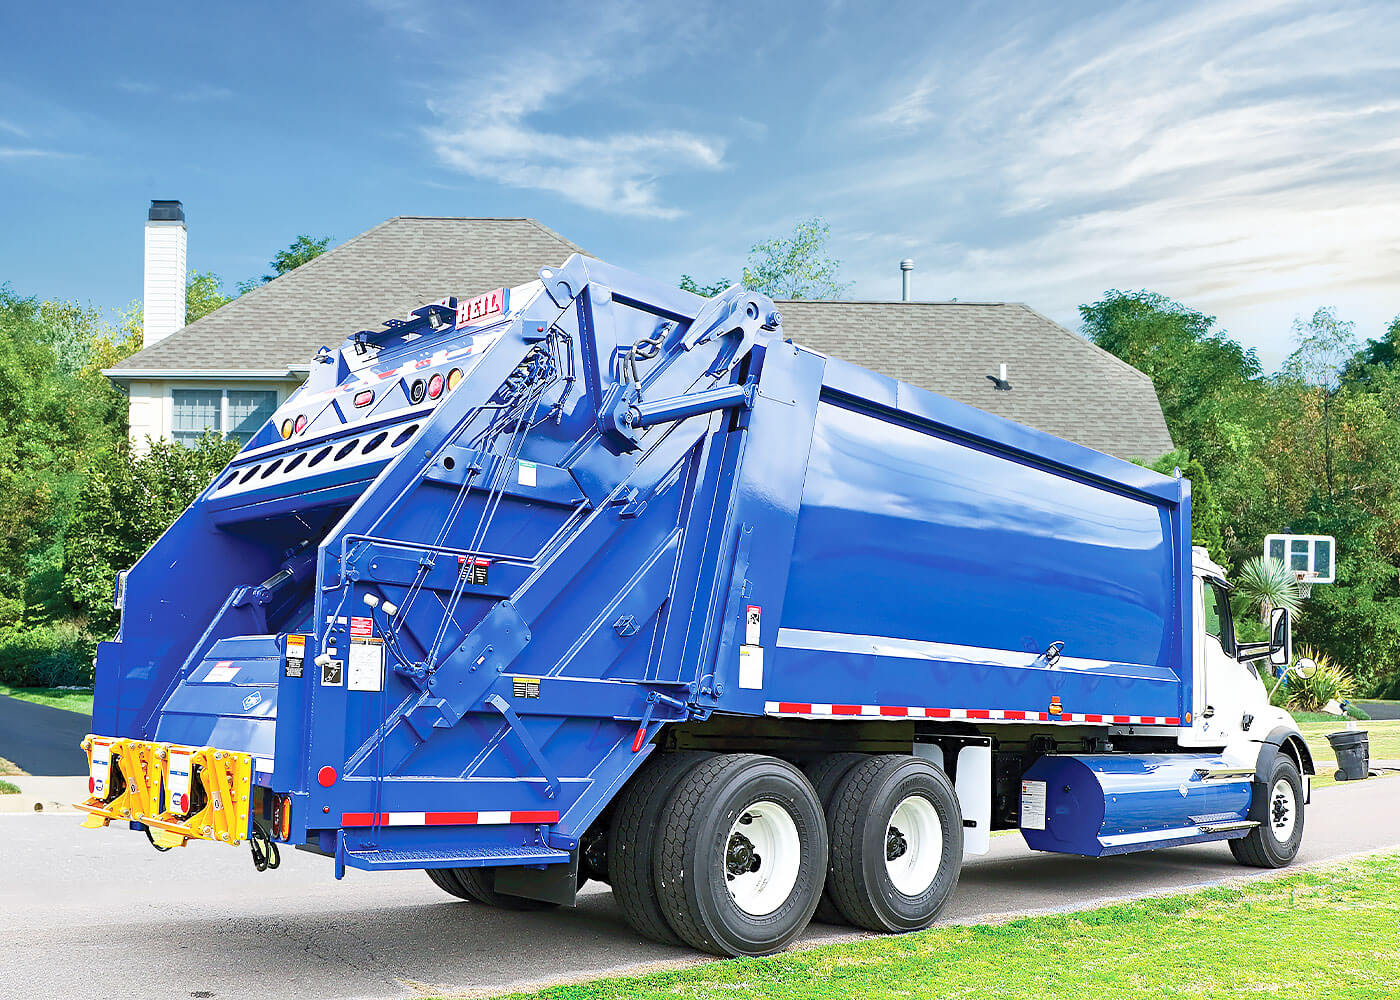 Powertrak commercial rear load trash trucks with high compaction and big hopper